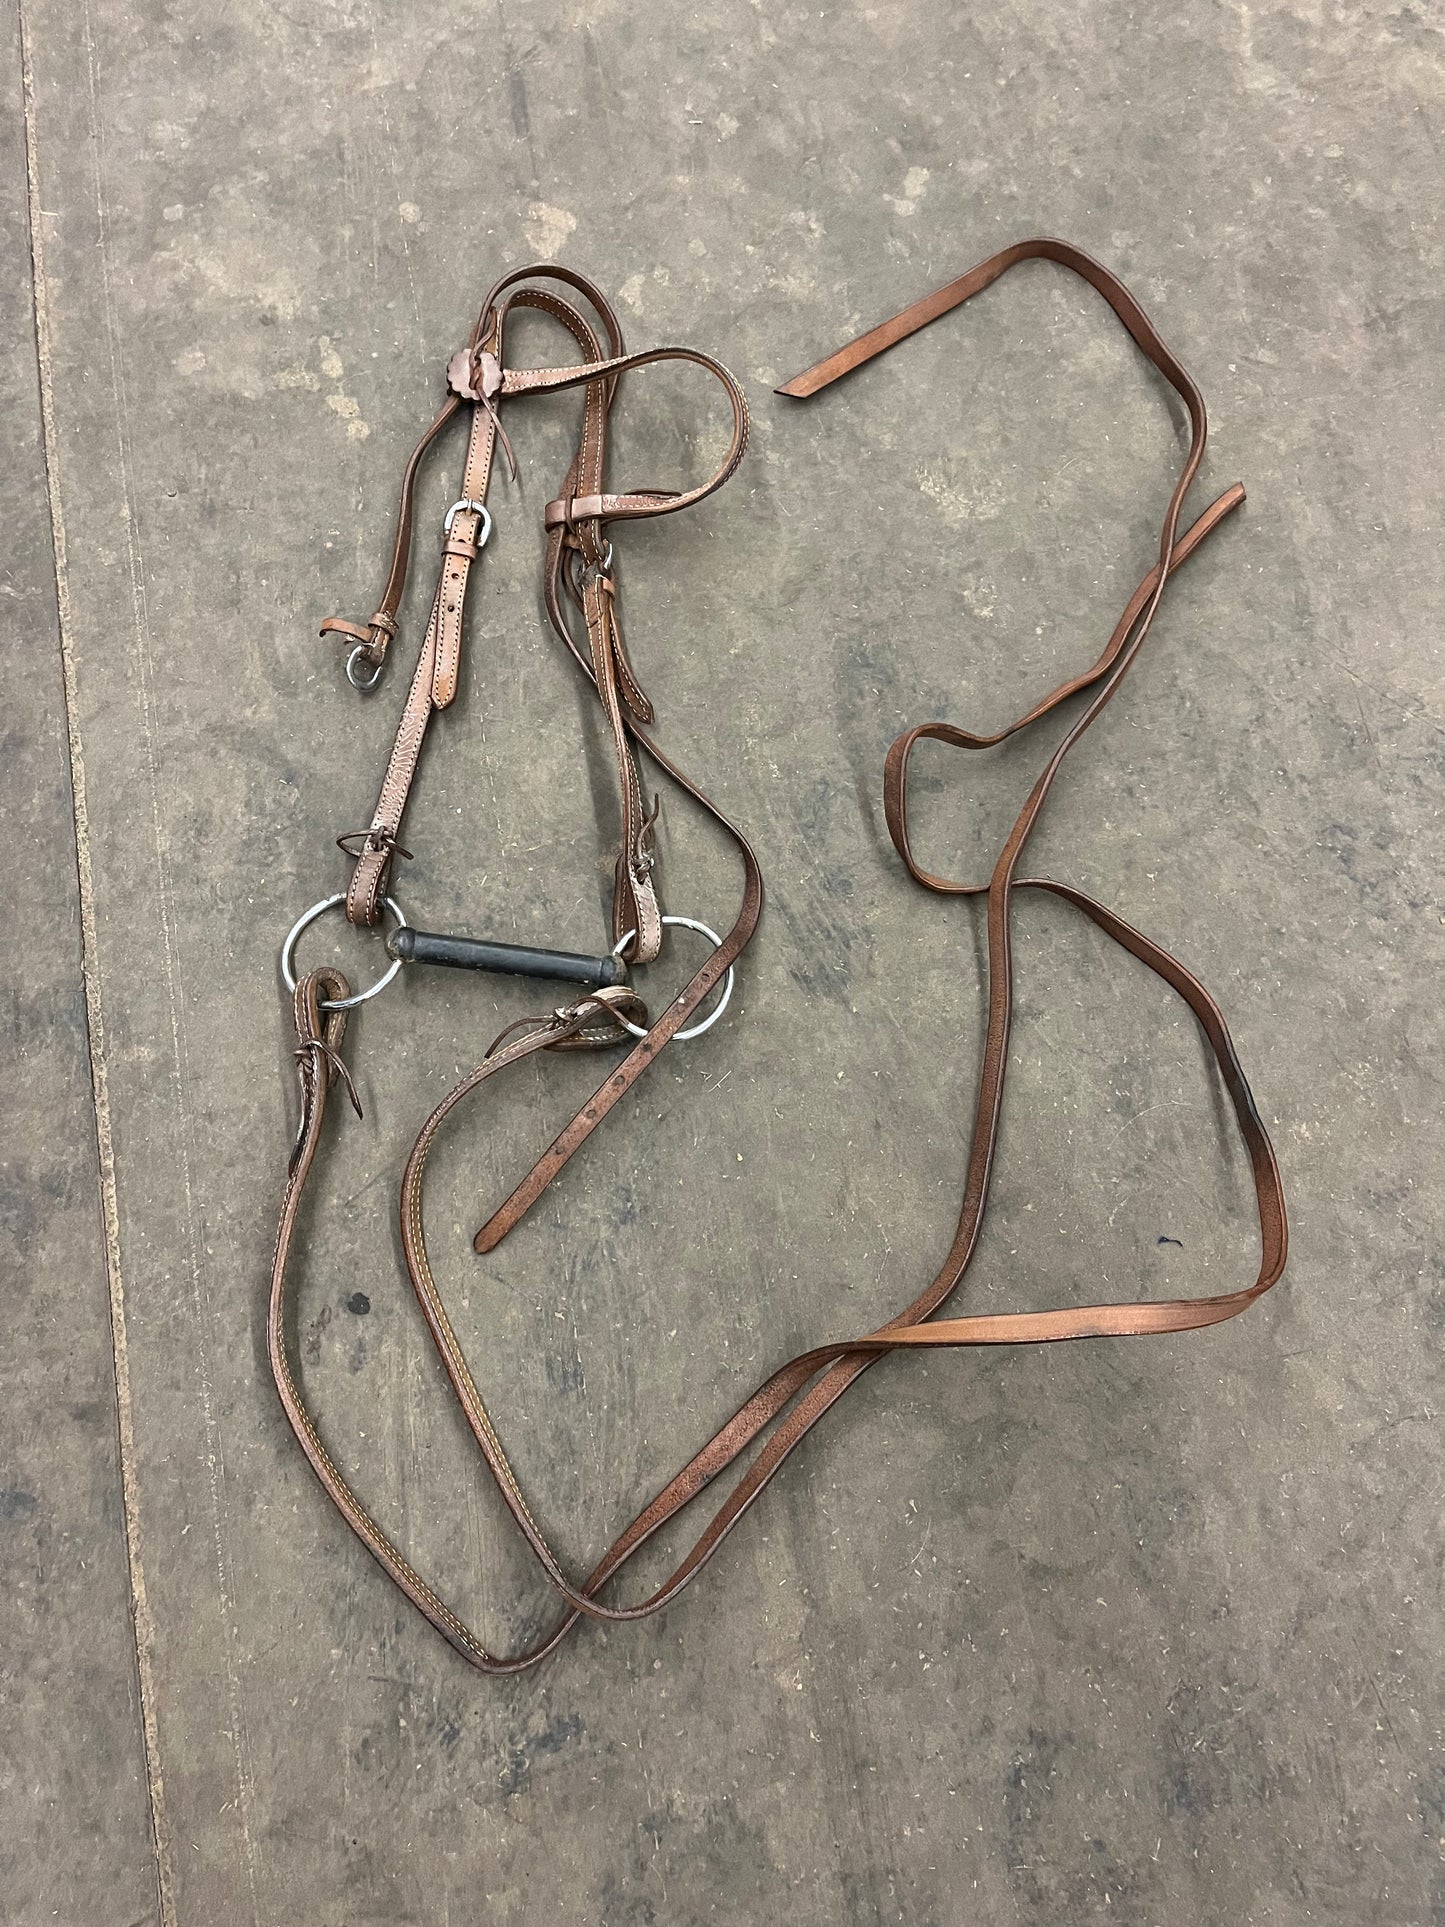 Headstall with bit and reins